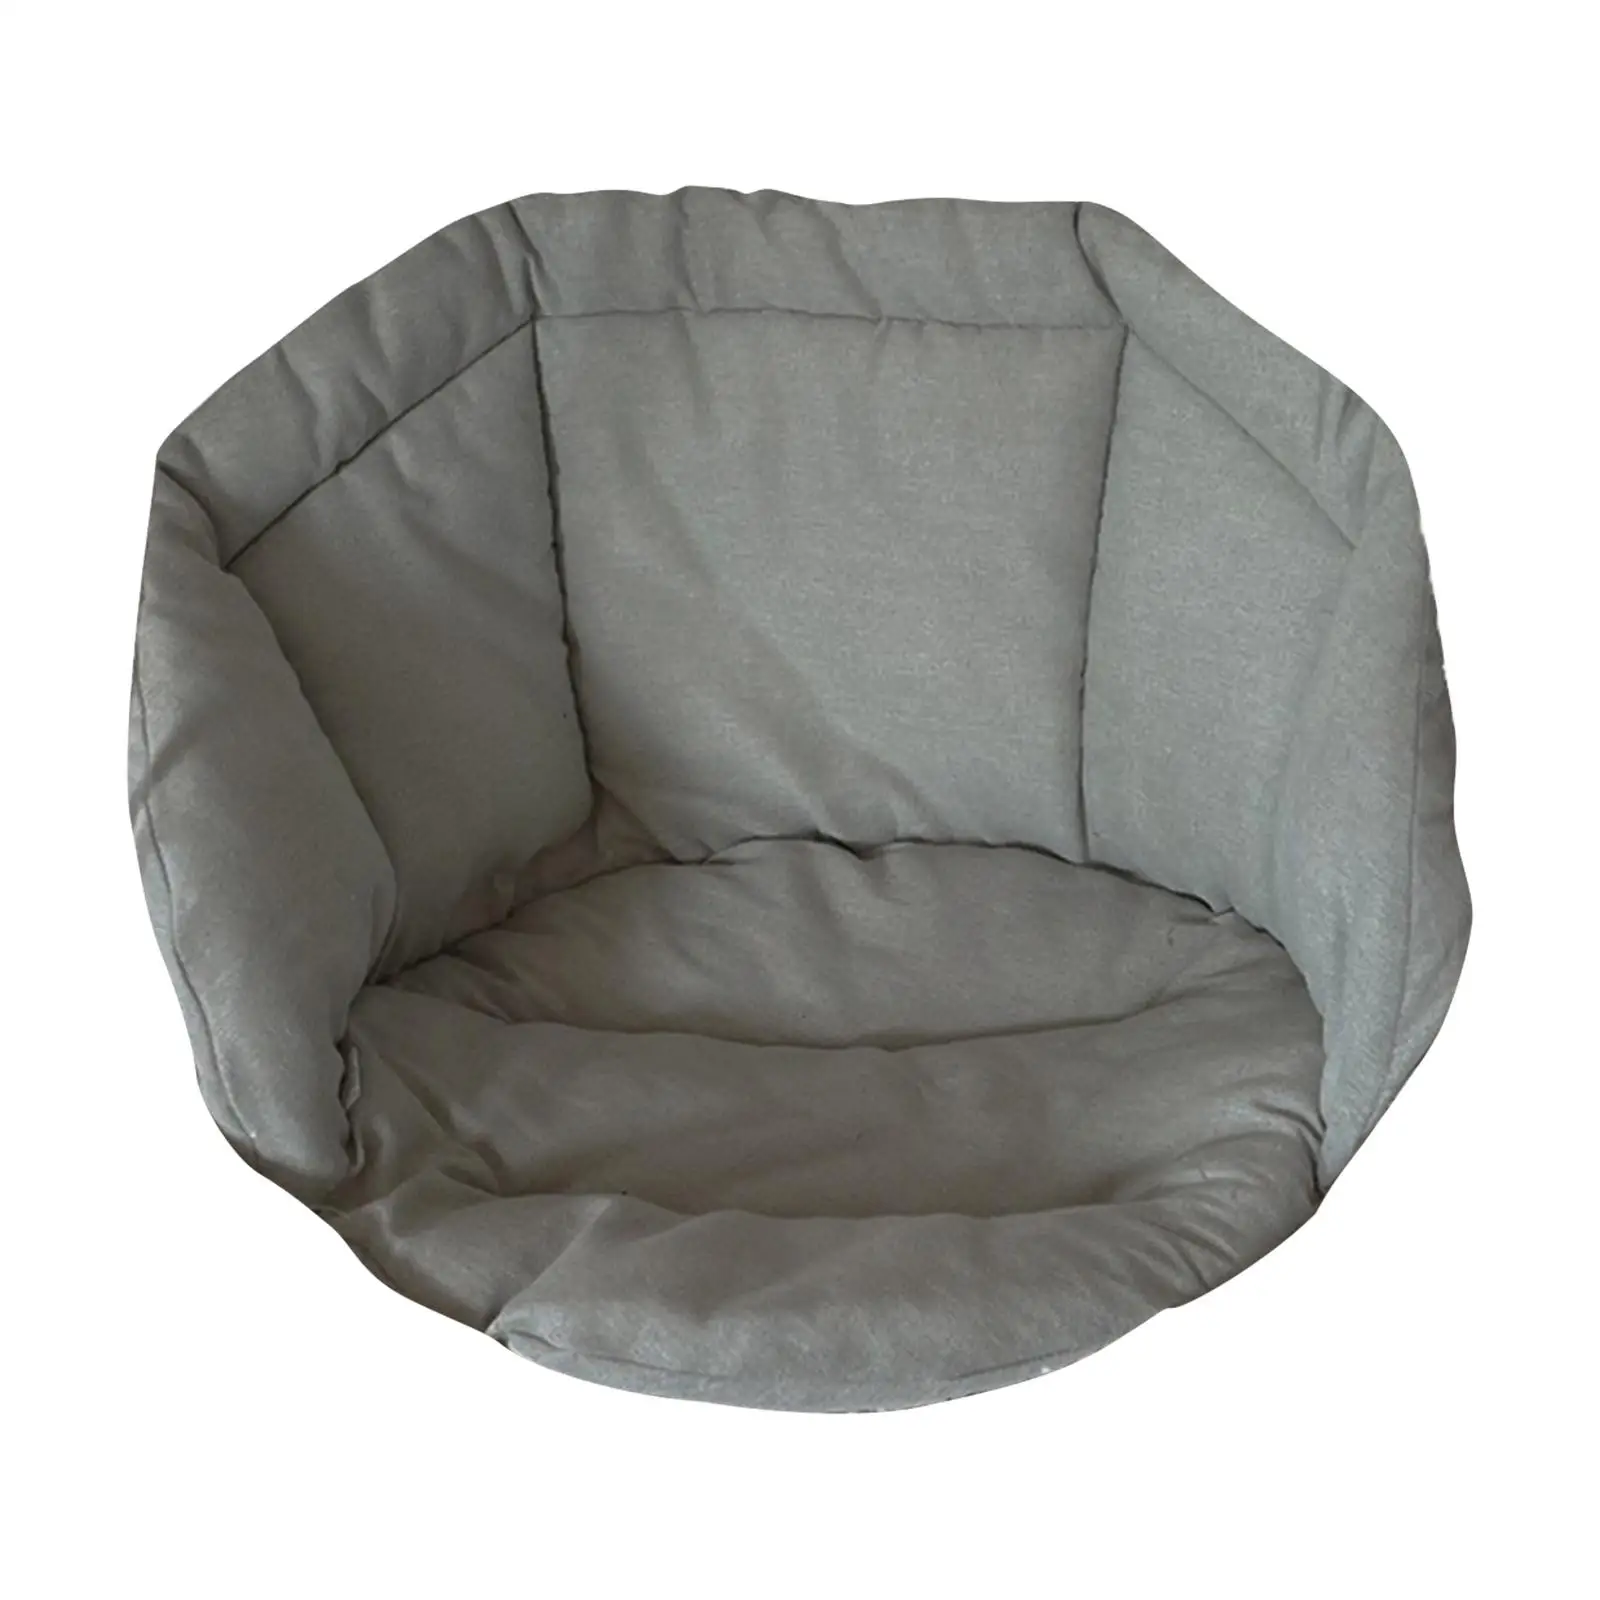 Outdoor Hanging Chair Cushion Comfortable Thicken for Hanging Swing Hammock